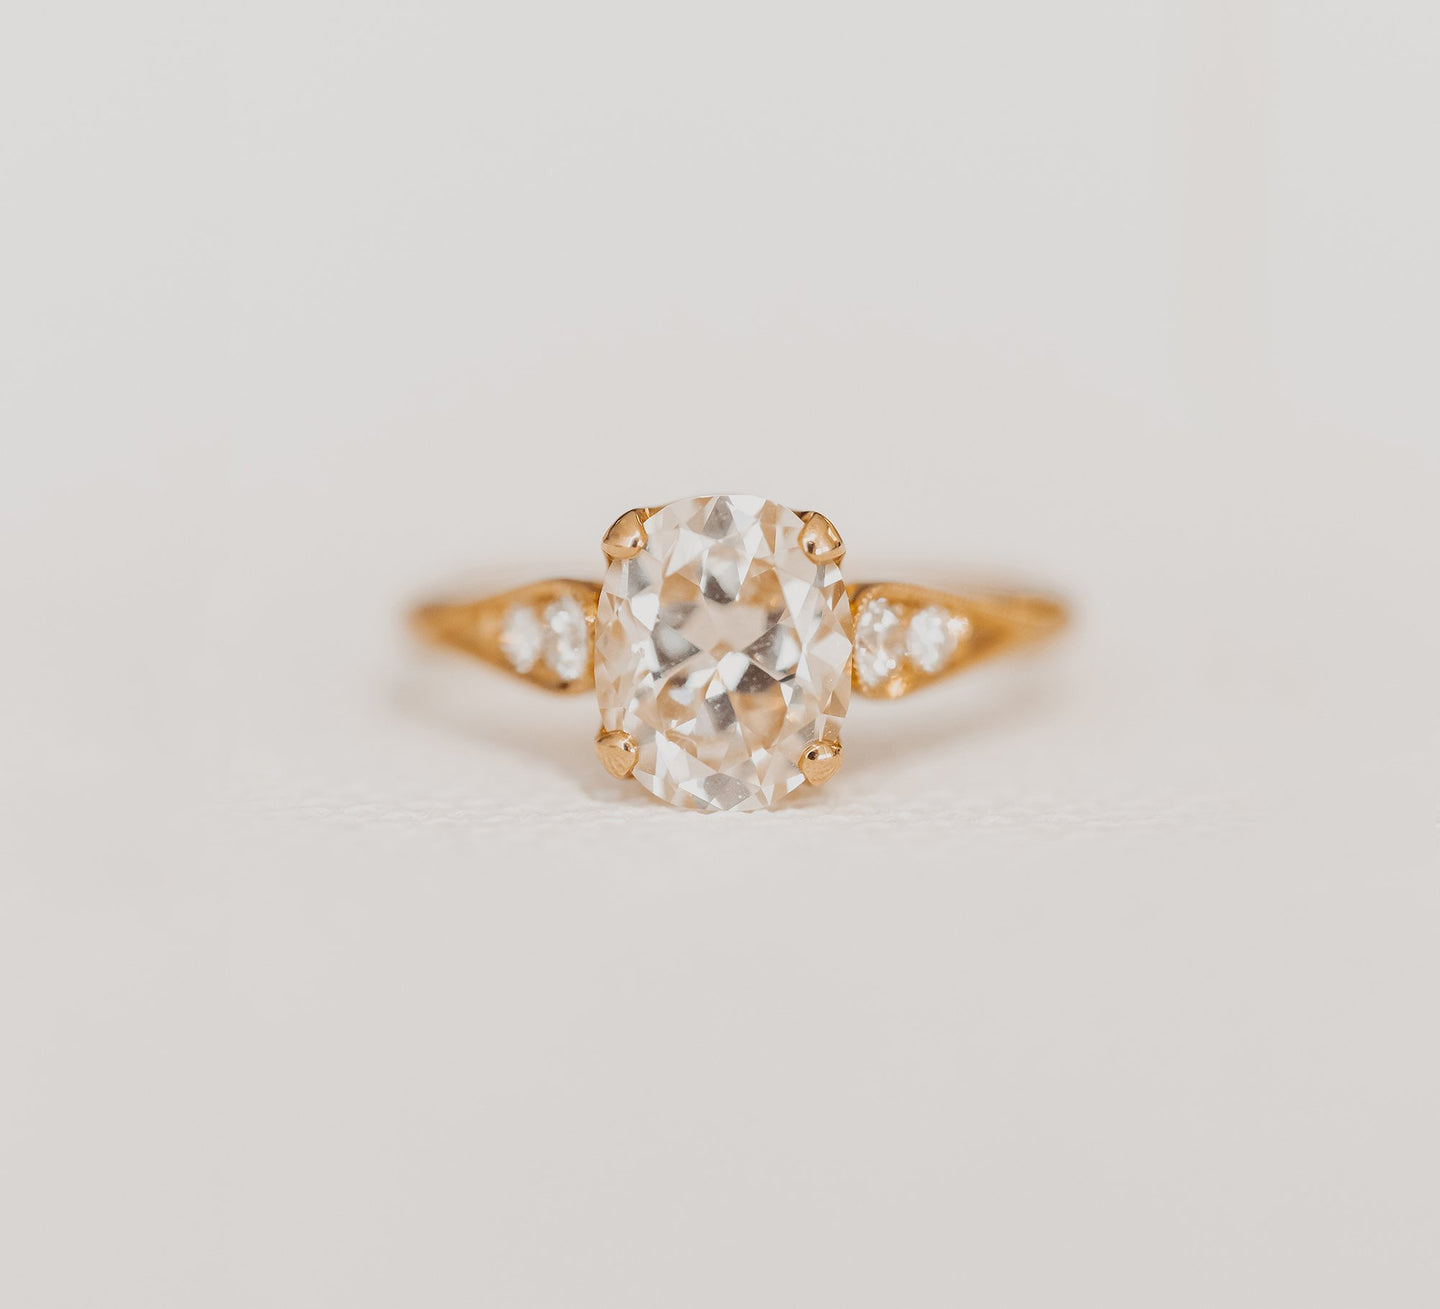 LAPADA Guide to Buying an Antique Engagement Ring